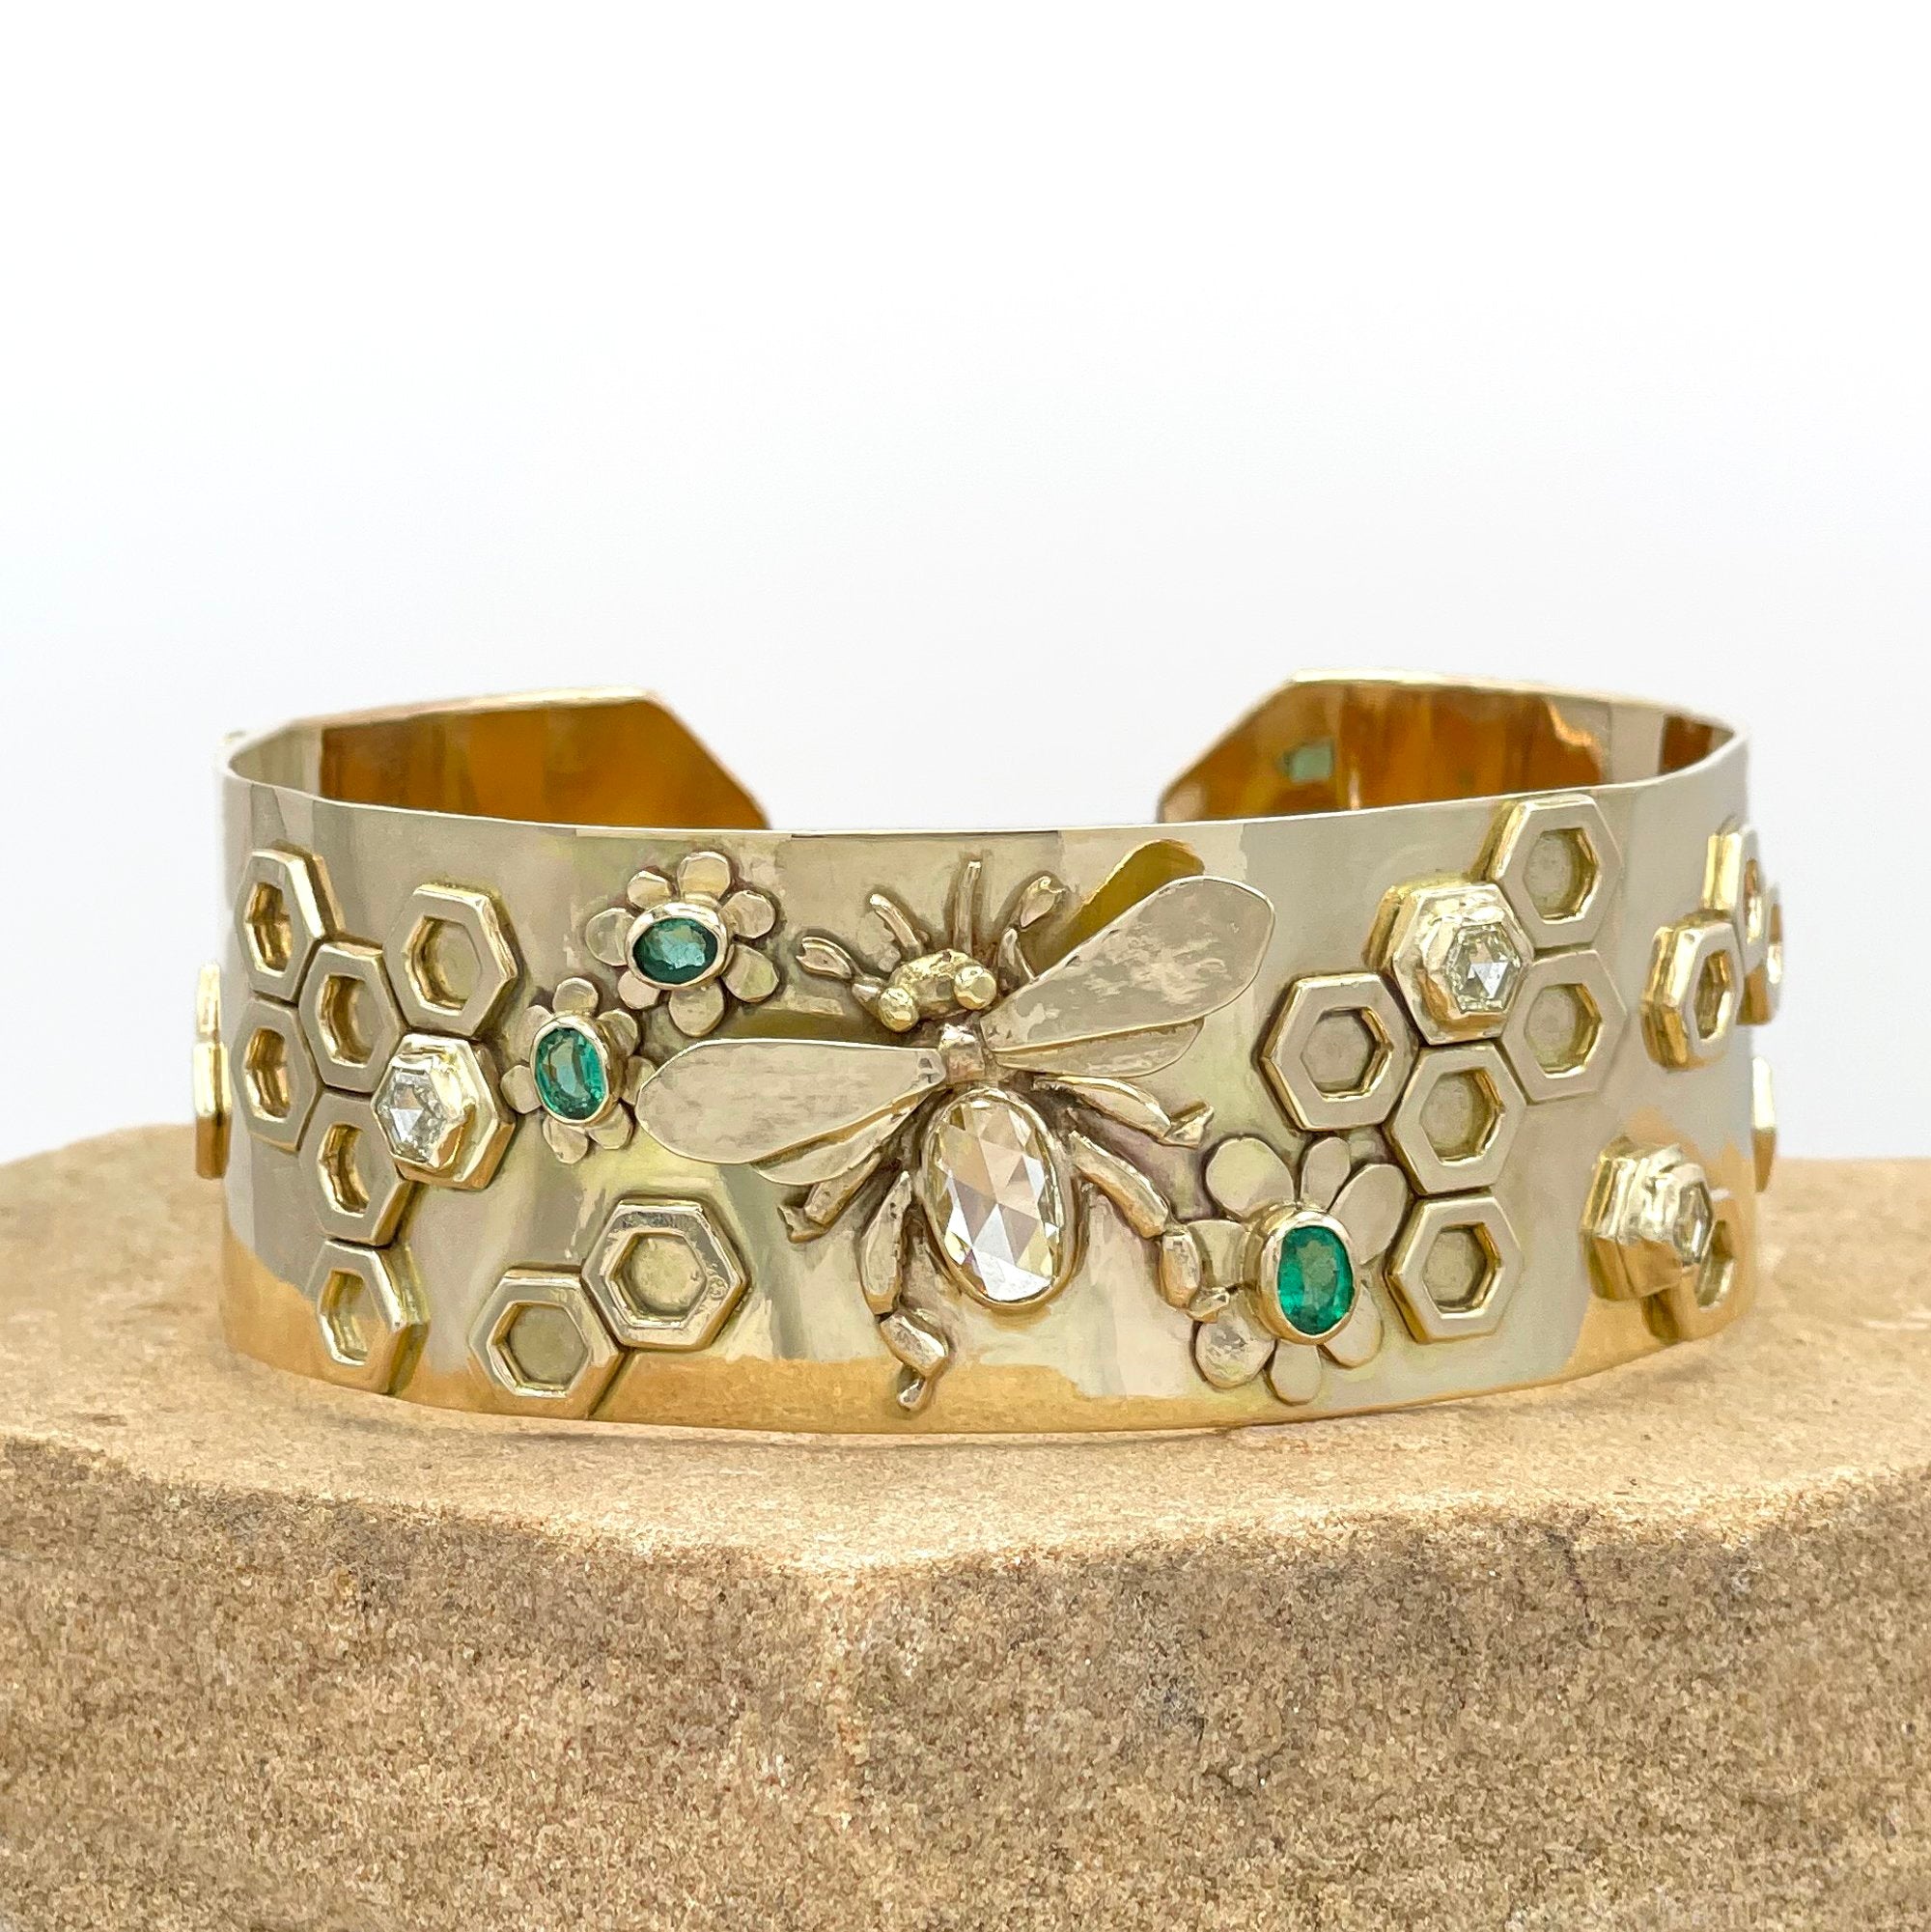 Diamond and Emerald Bumble Bee Cuff Bracelet, 14K Solid Gold, One of A Kind